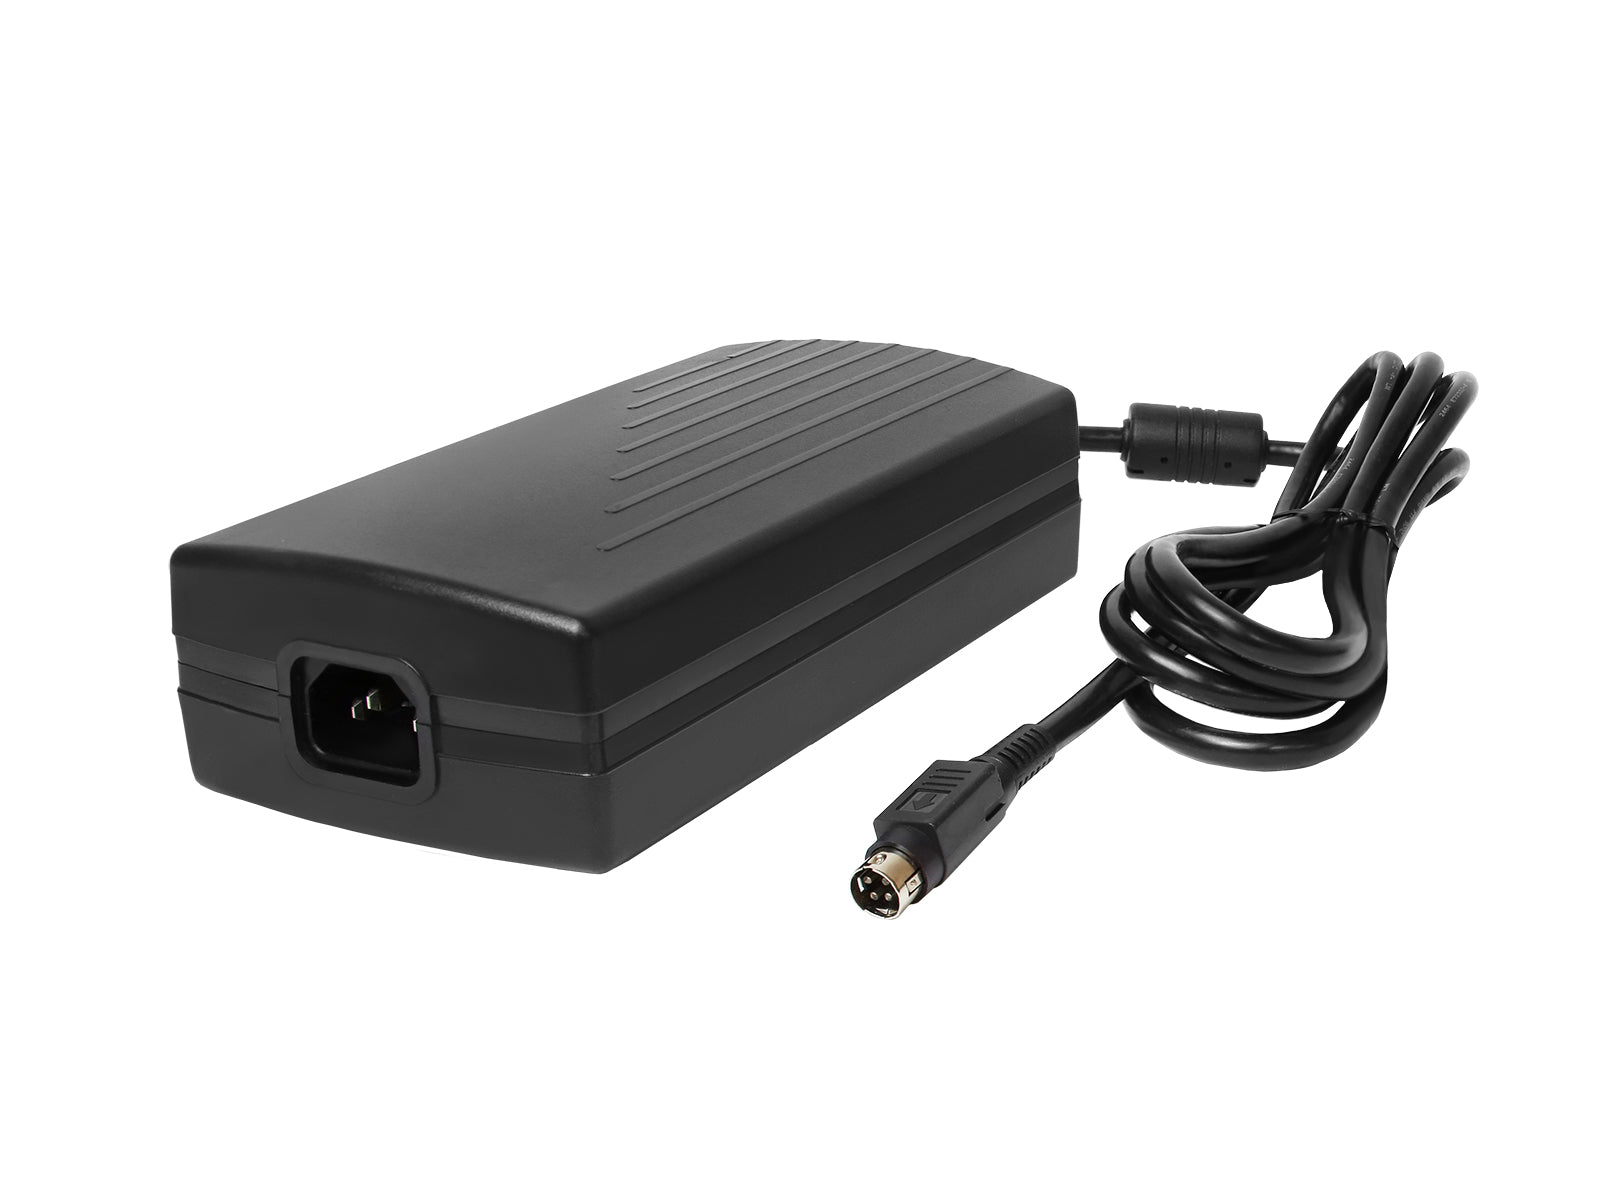 Skynet Electronic SNP-A129-M Medical 24V 5A Power Supply AC Adapter for Barco Medical Monitors (SNP-A129-M) Monitors.com 